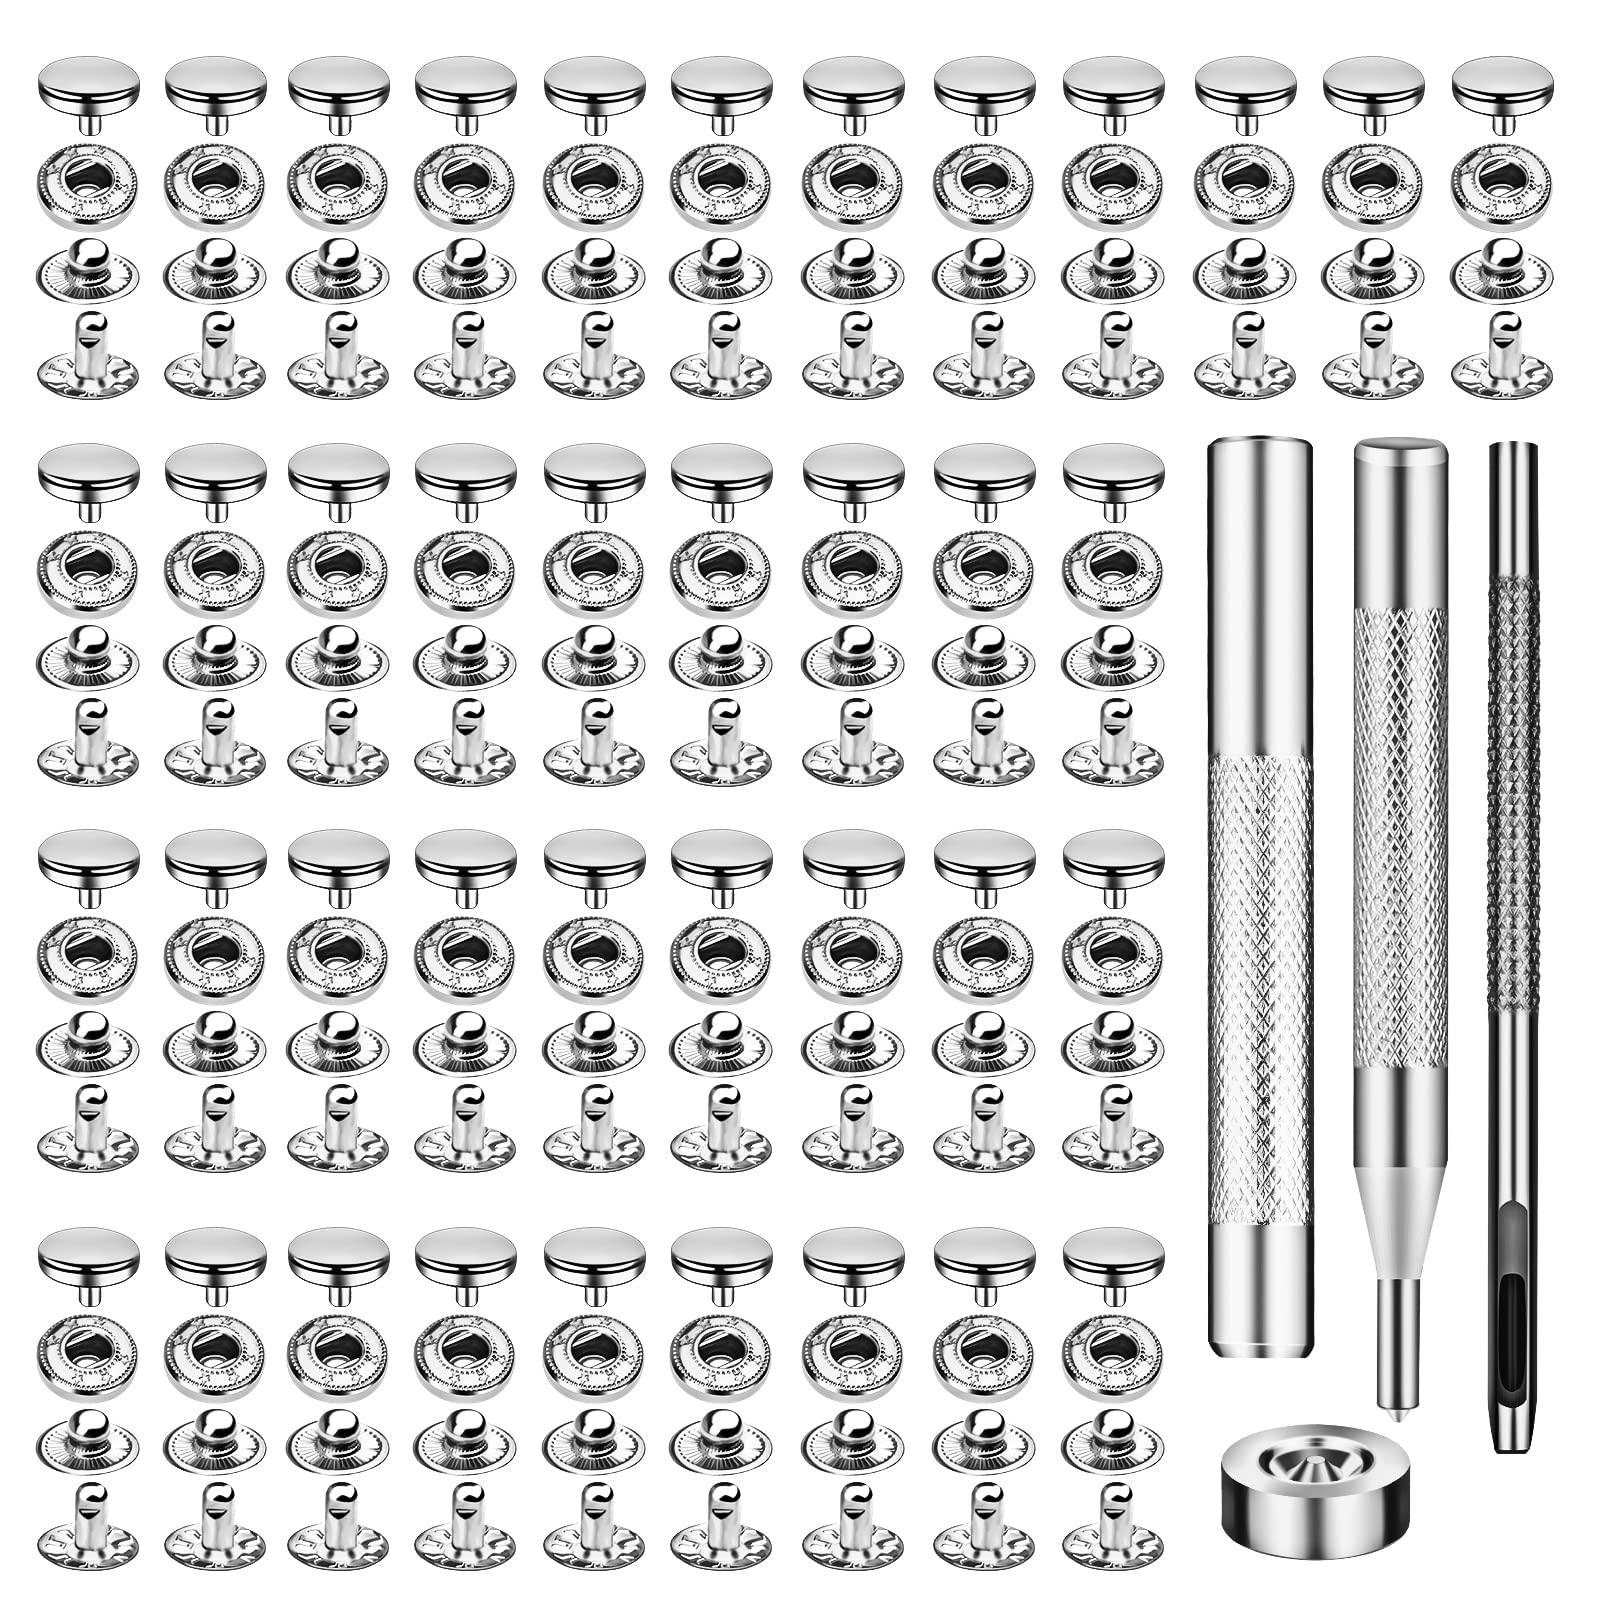 Snap Fastener Kit with Tools for Fabric Sewing Clothes 360 Sets